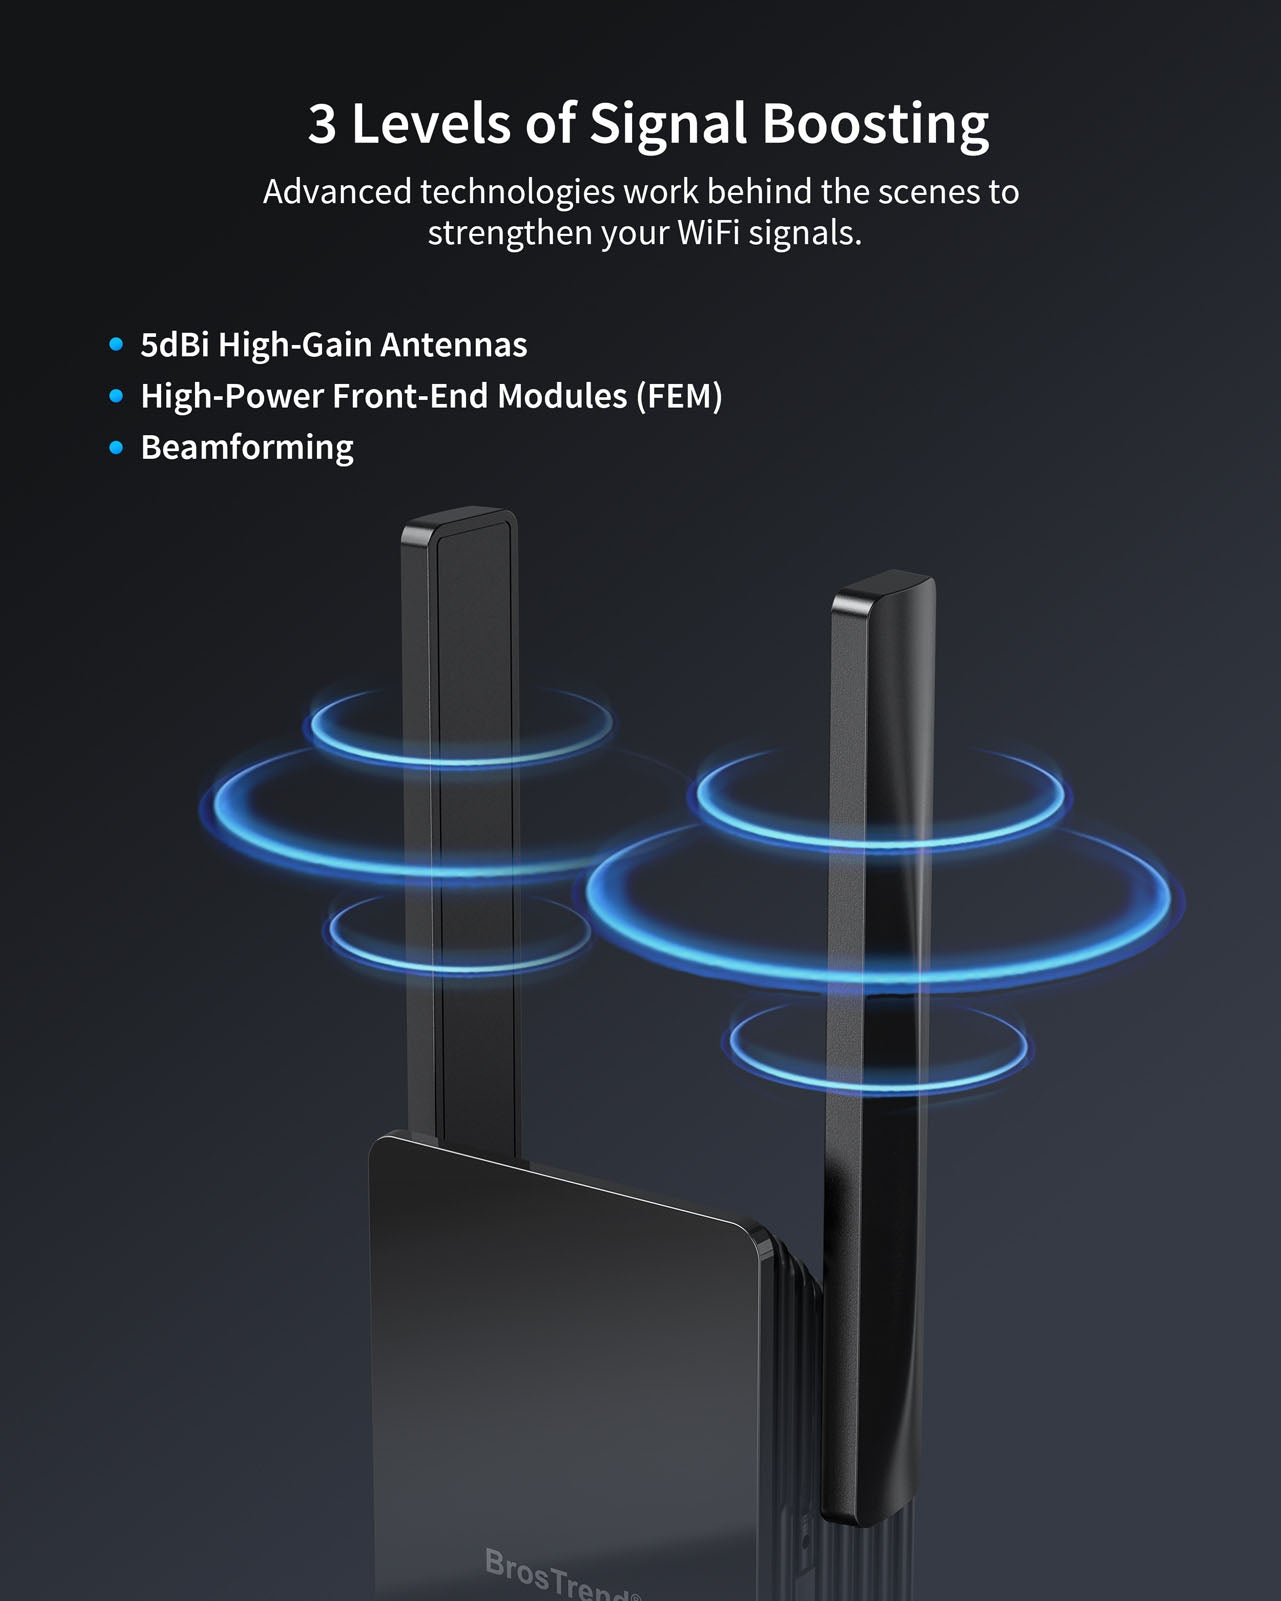 AX3000 WiFi 6 Extender Brings You Exceptional WiFi Signals with Beamforming Technology High-Power Front-End Modules FEM and High-Gain External Antennas